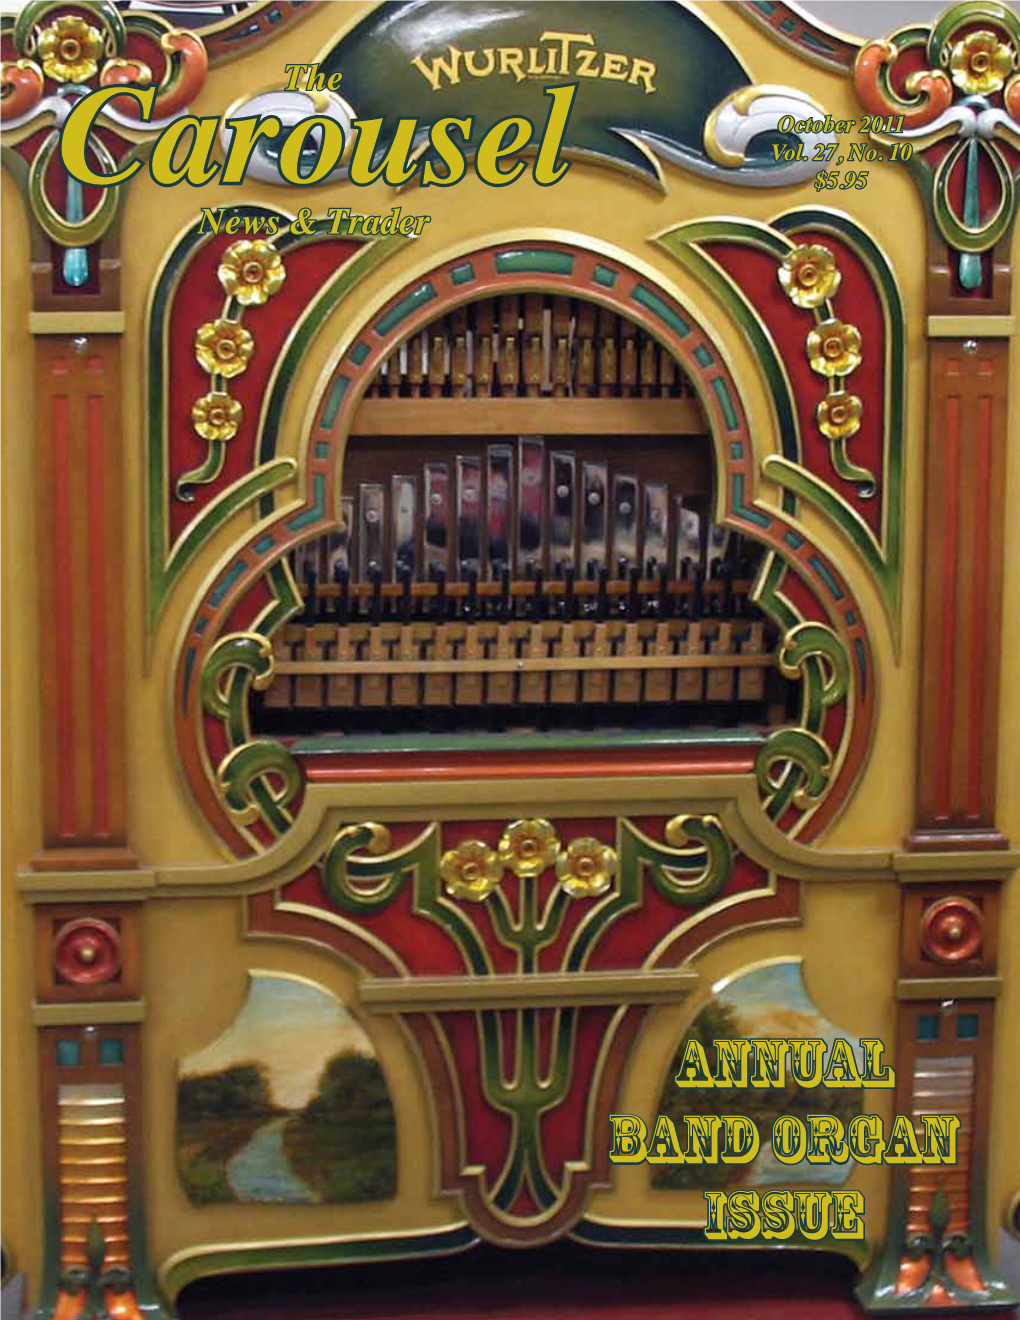 ANNUAL BAND ORGAN Issue Carousel News & Trader, October 2011 1 Visit Our Website for a Complete List of Items to Be Offered at Auction